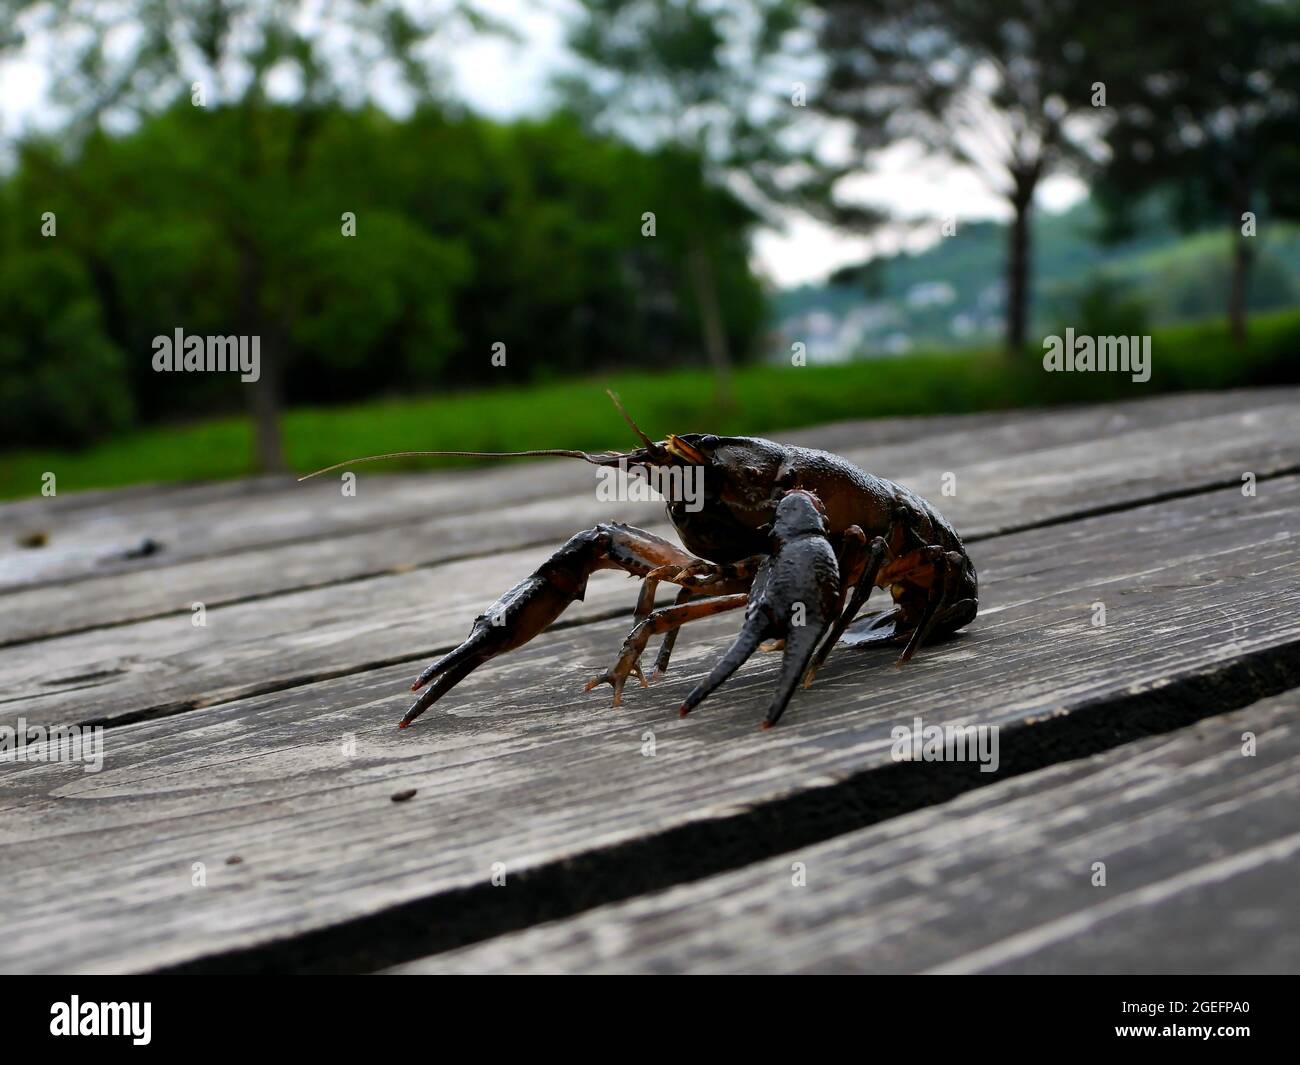 Selective focus shot of a wet Astacus Crustacean on a bench with a park in the blurred background Stock Photo